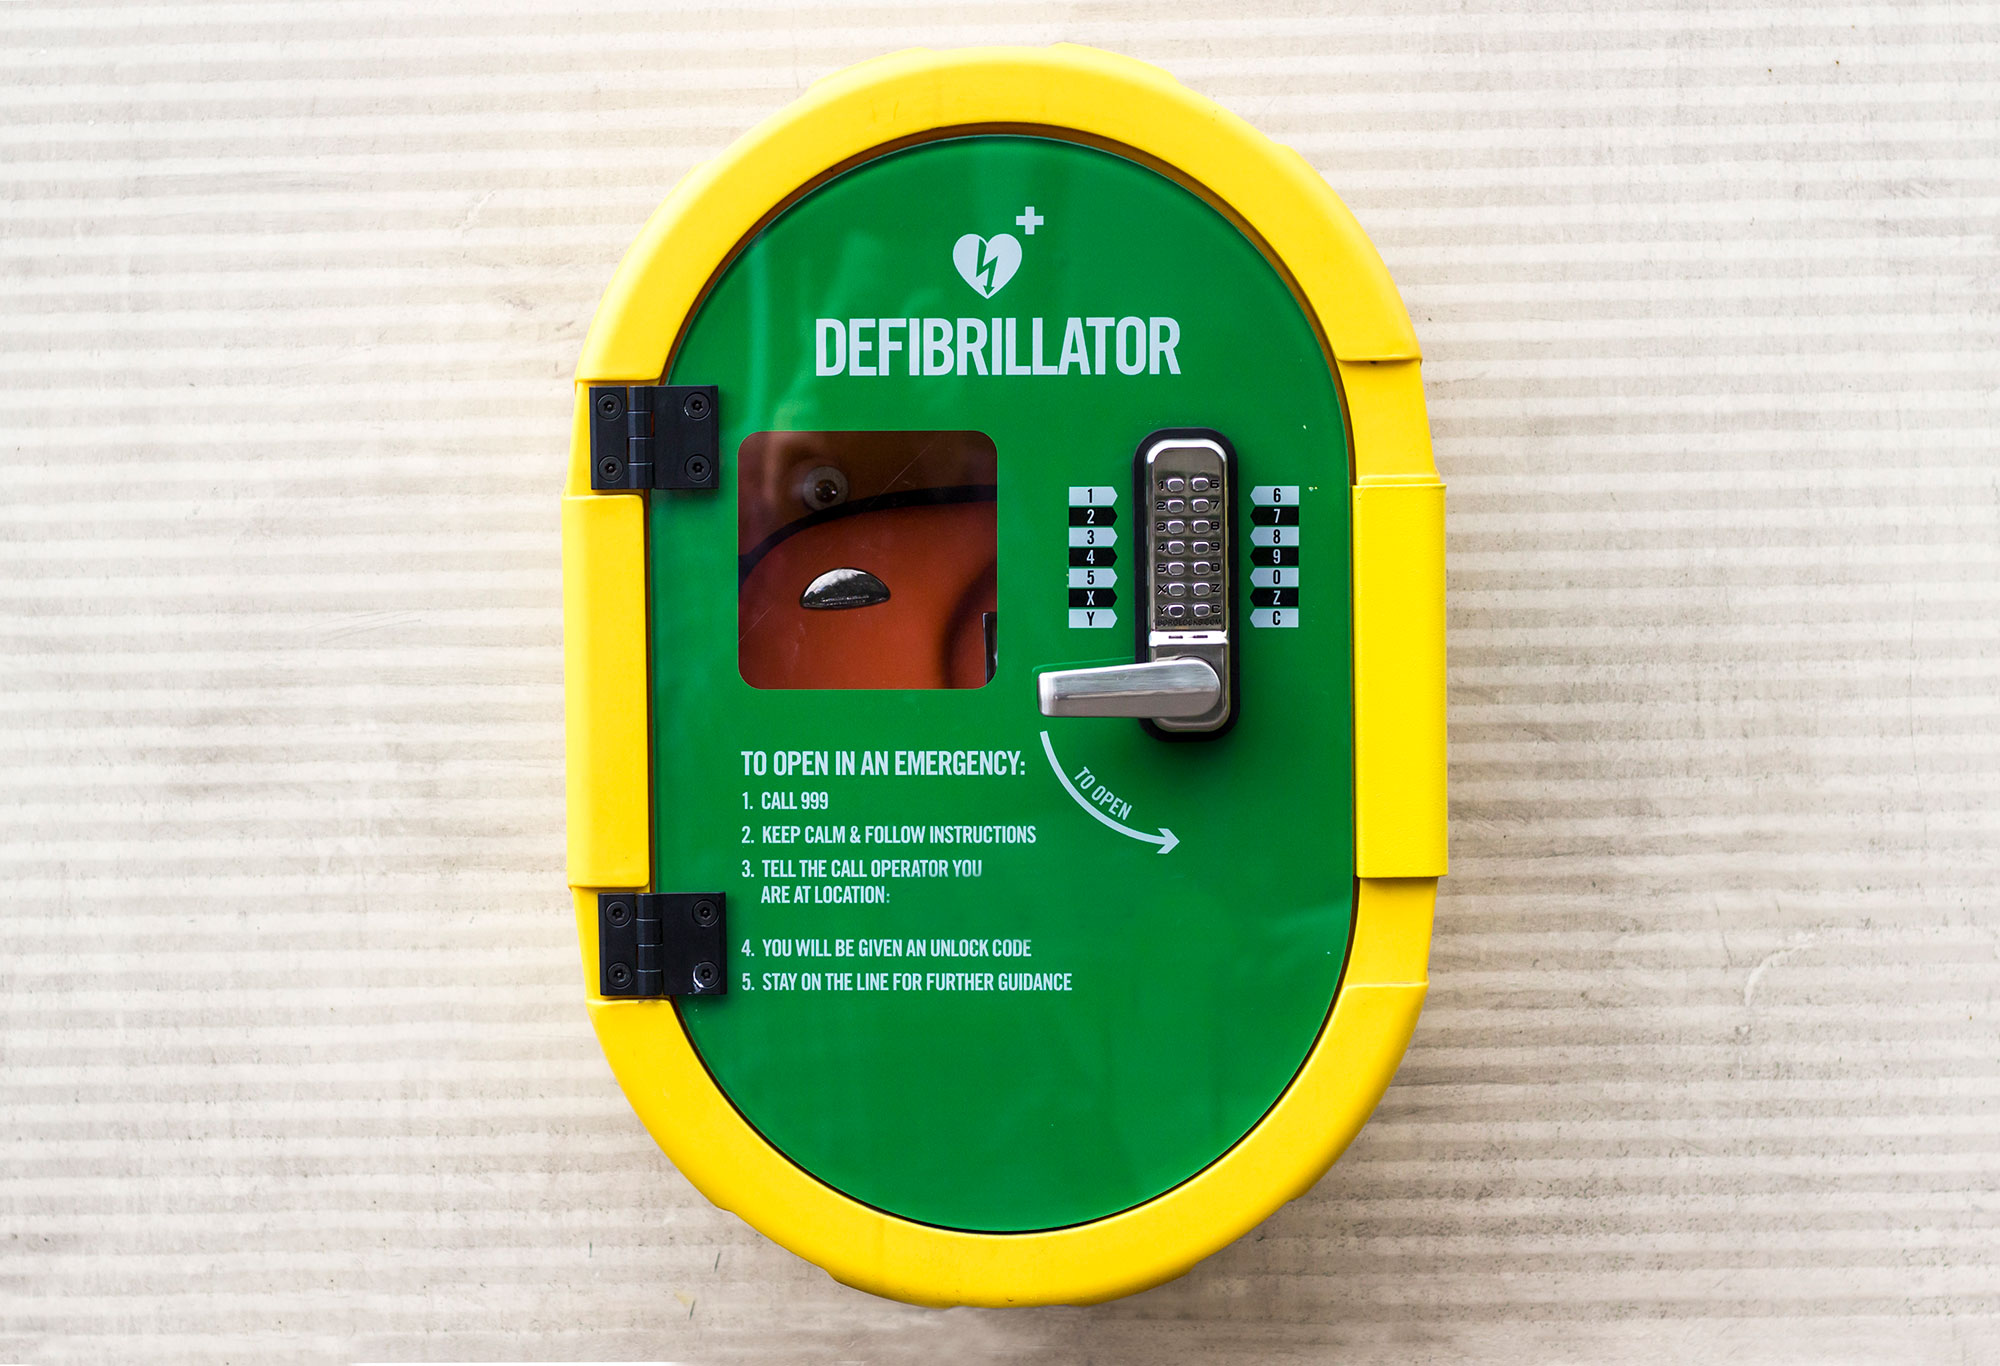 Save lives in your facility and local community with a defibrillator